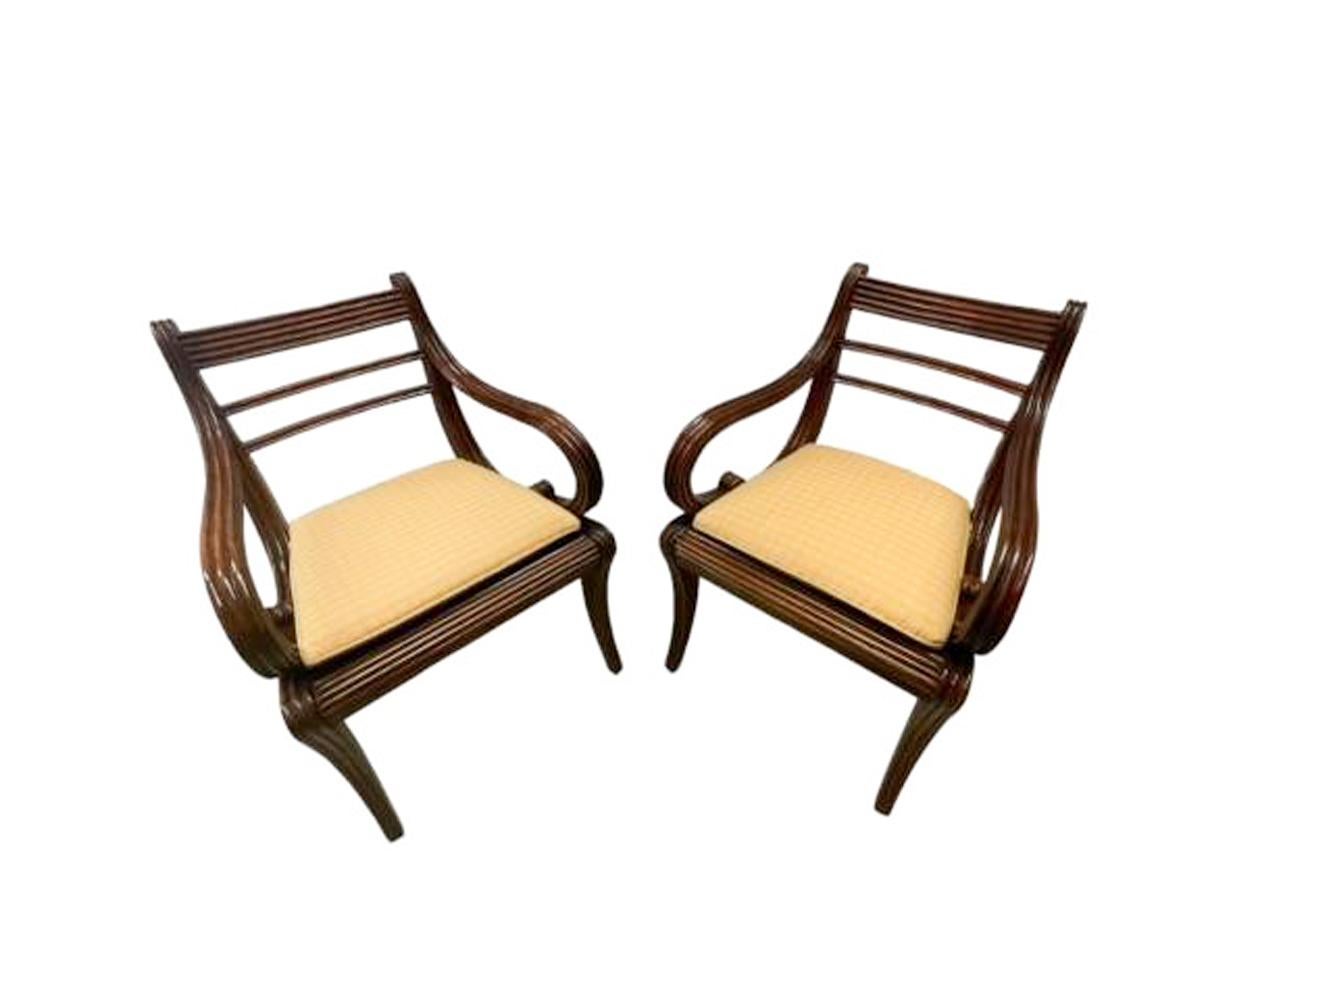 Fine pair of Anglo-Indian carved mahogany armchairs in the English Regency taste. Front and side surfaces carved with reeded surfaces, the back curving back at the crest rail with exaggerated curling arms and hand-woven cane seat supported on saber